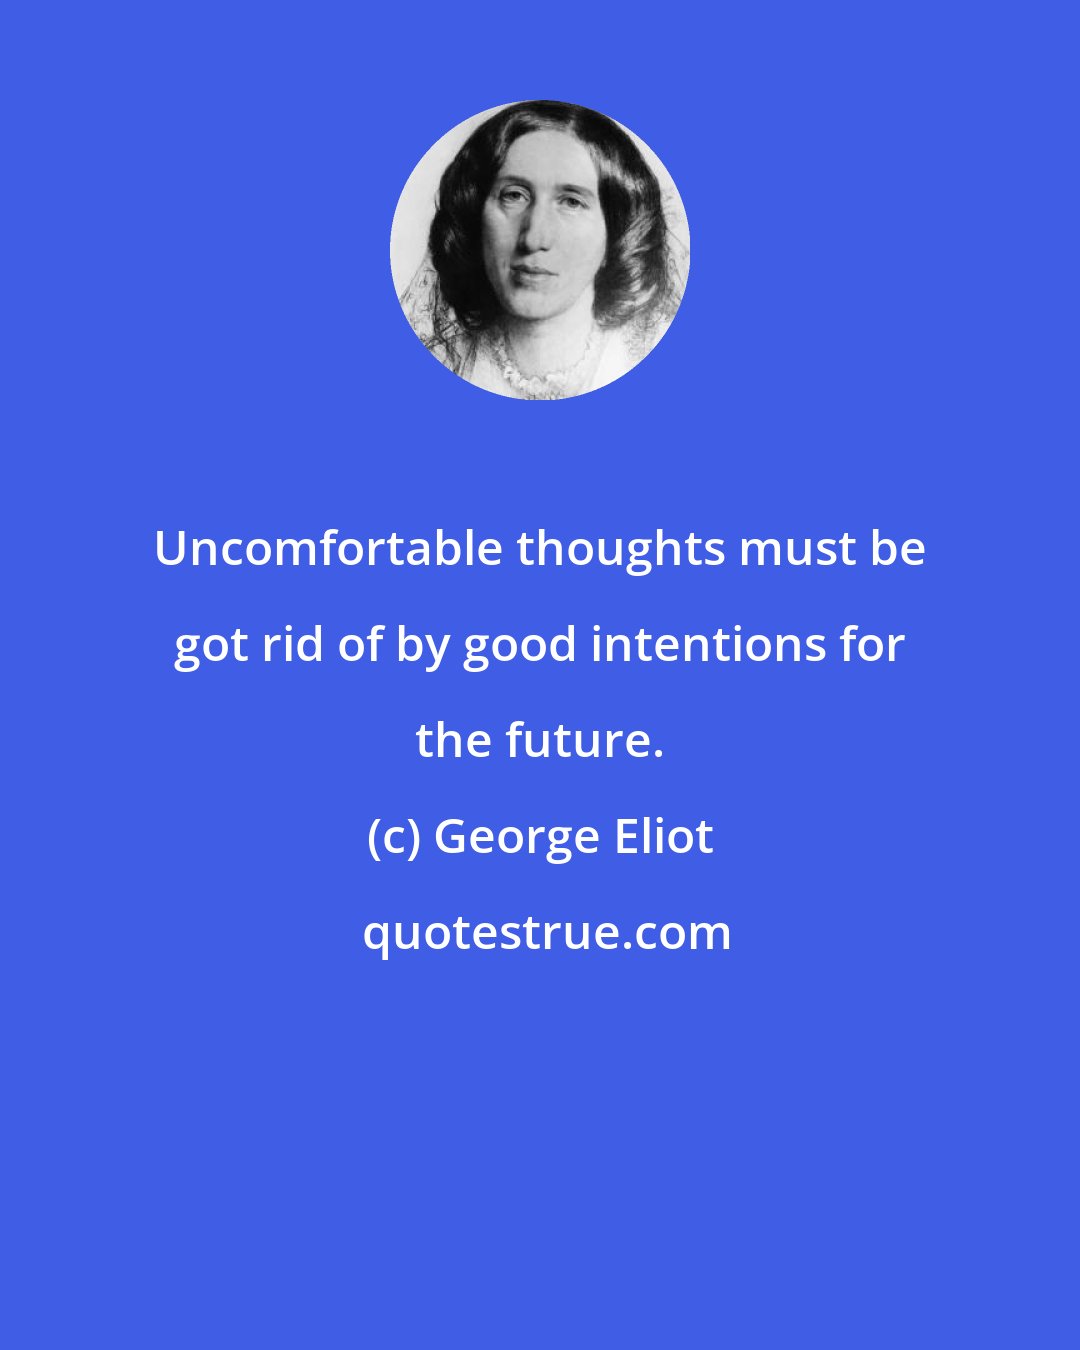 George Eliot: Uncomfortable thoughts must be got rid of by good intentions for the future.